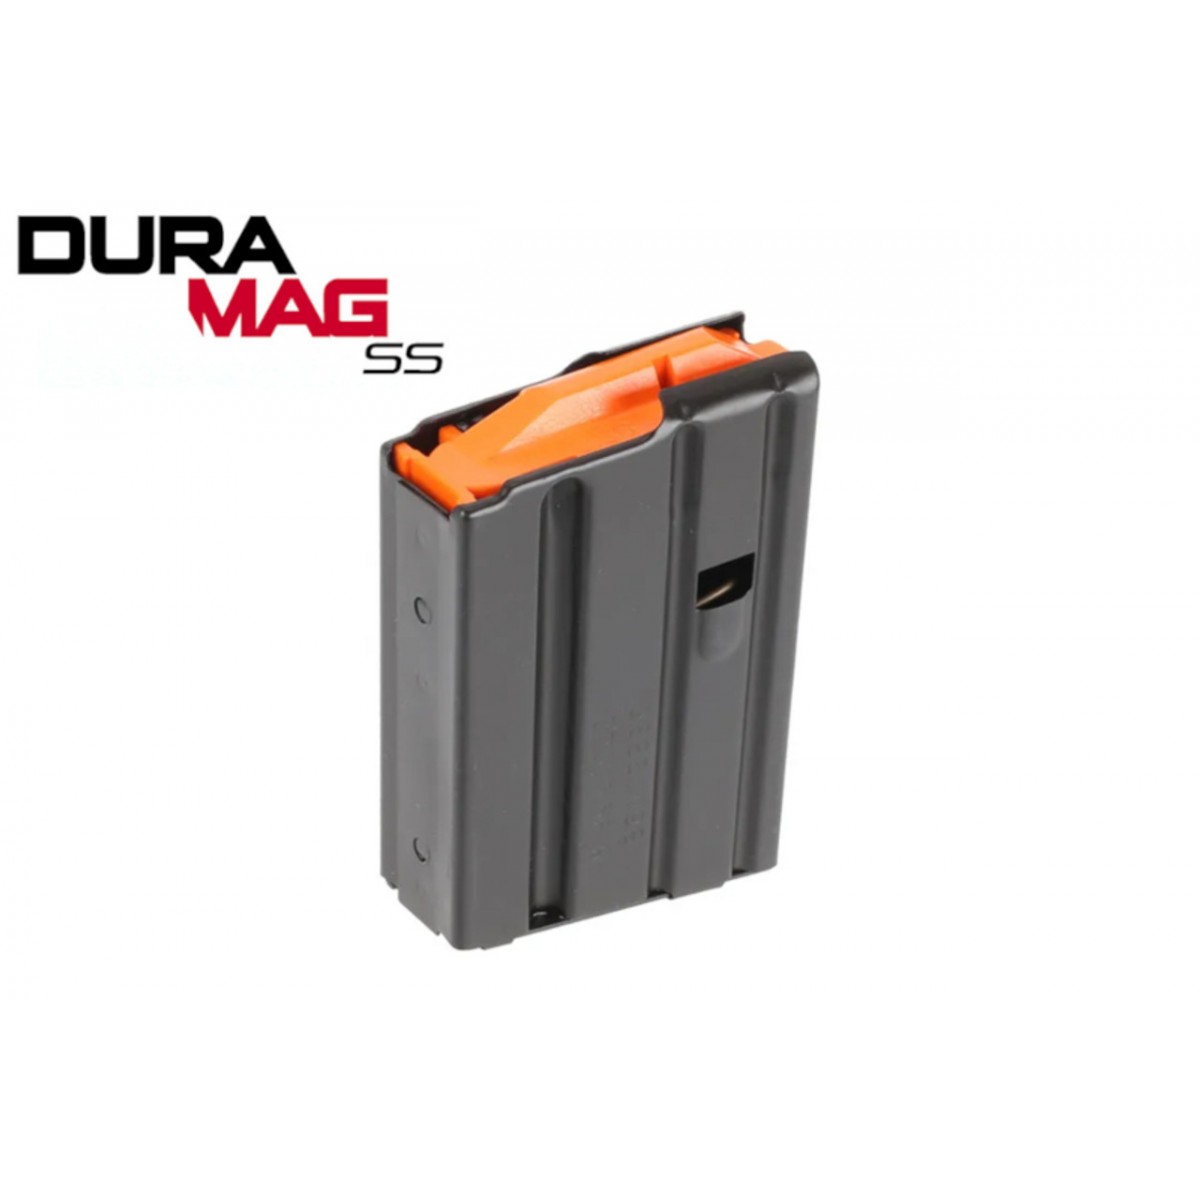 CHARGEUR AR-15 DURA MAG 5 CPS